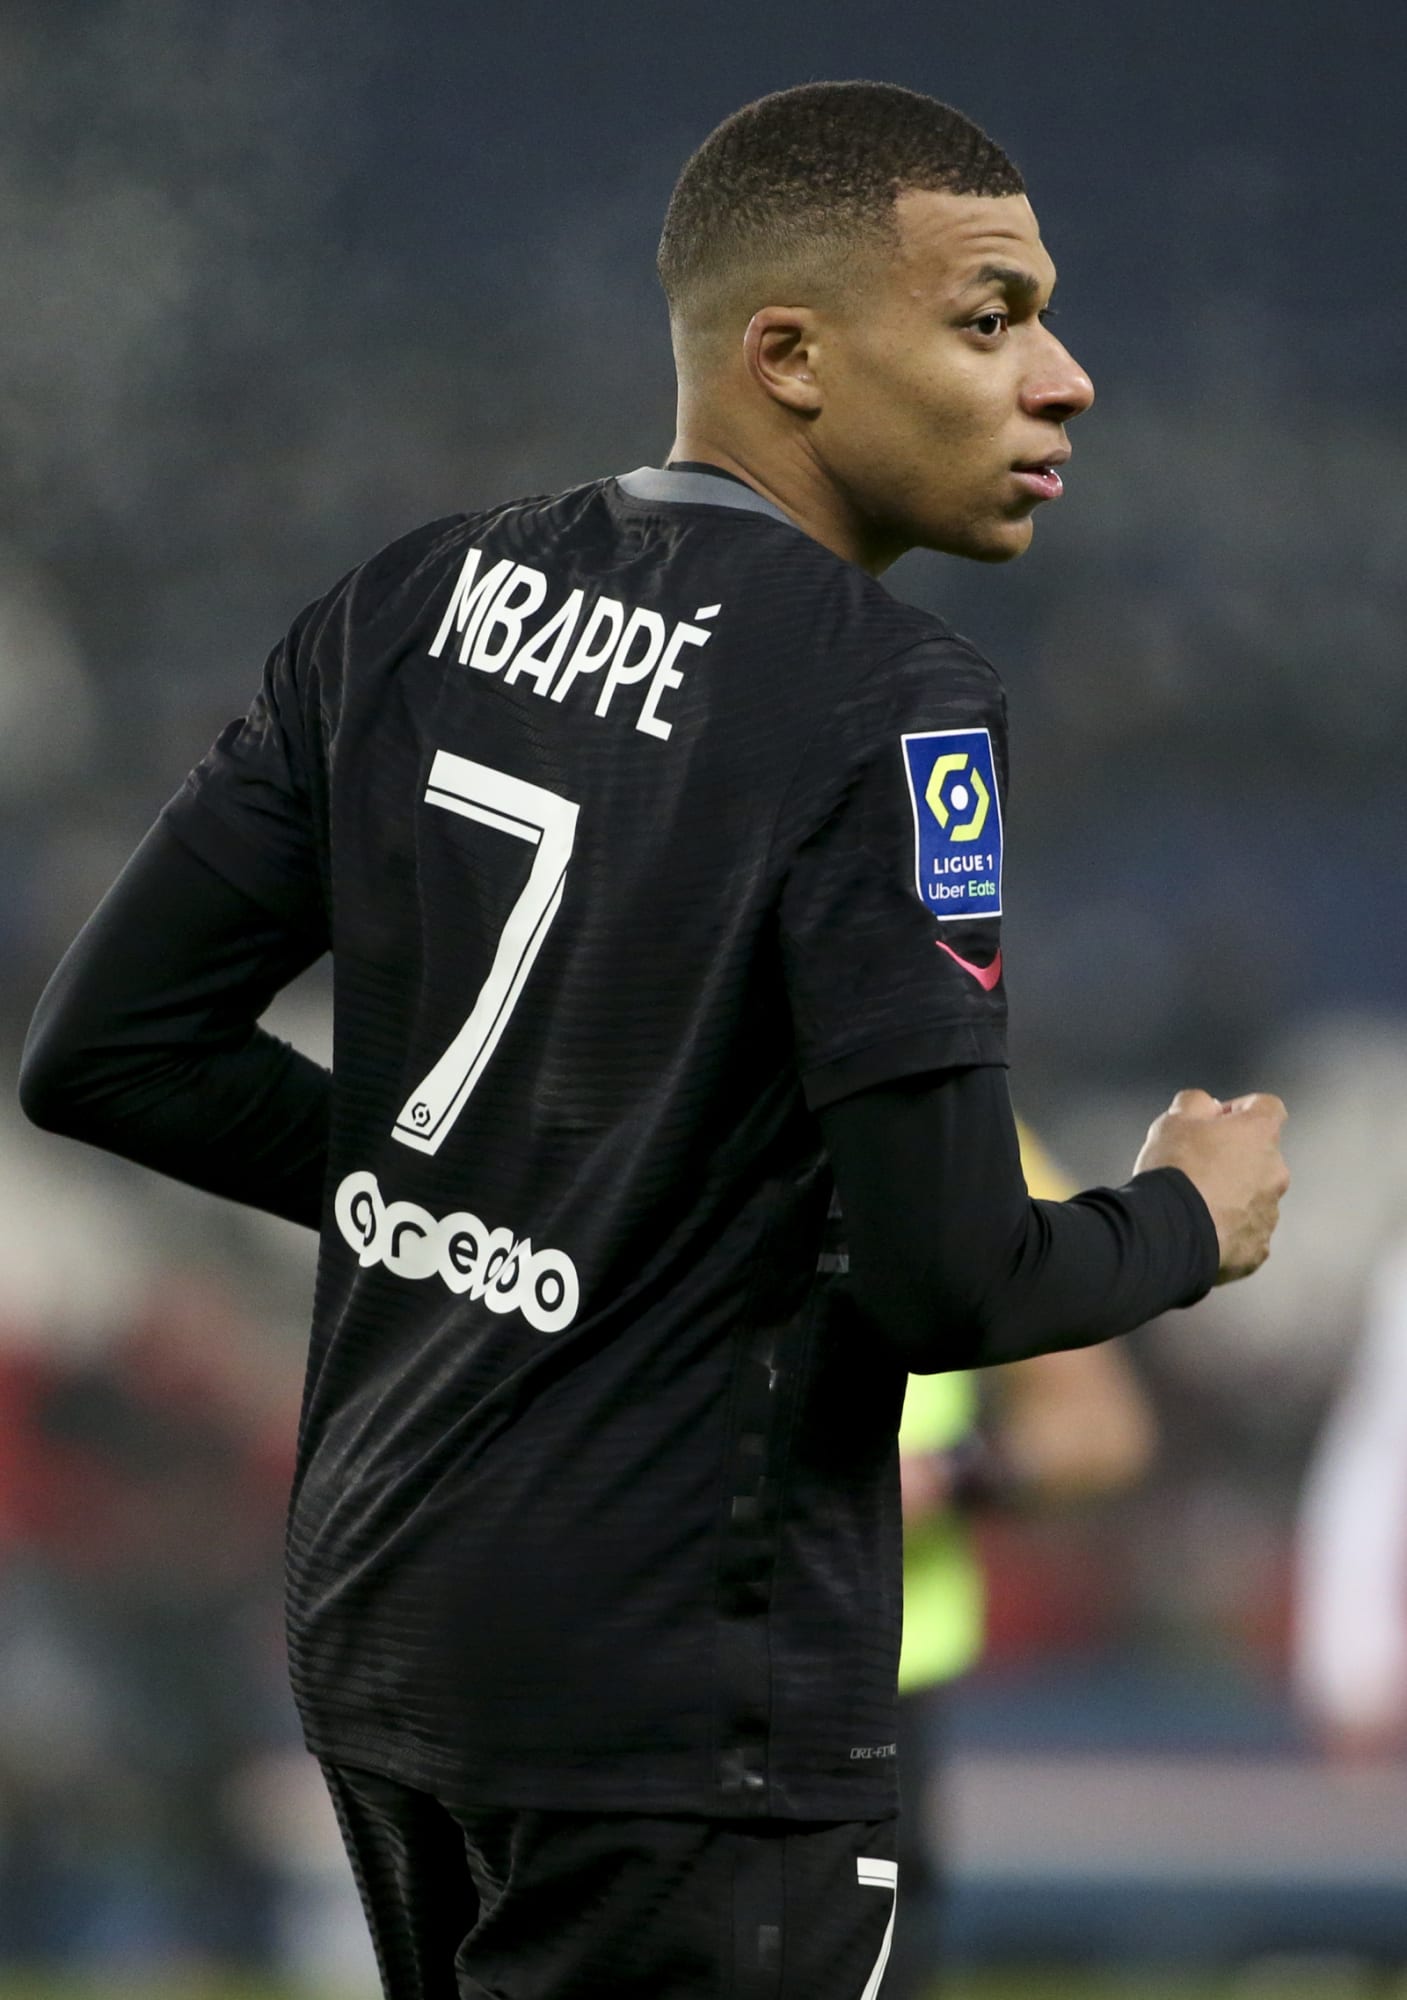 A more reassuring Kylian Mbappe transfer update for Real Madrid fans